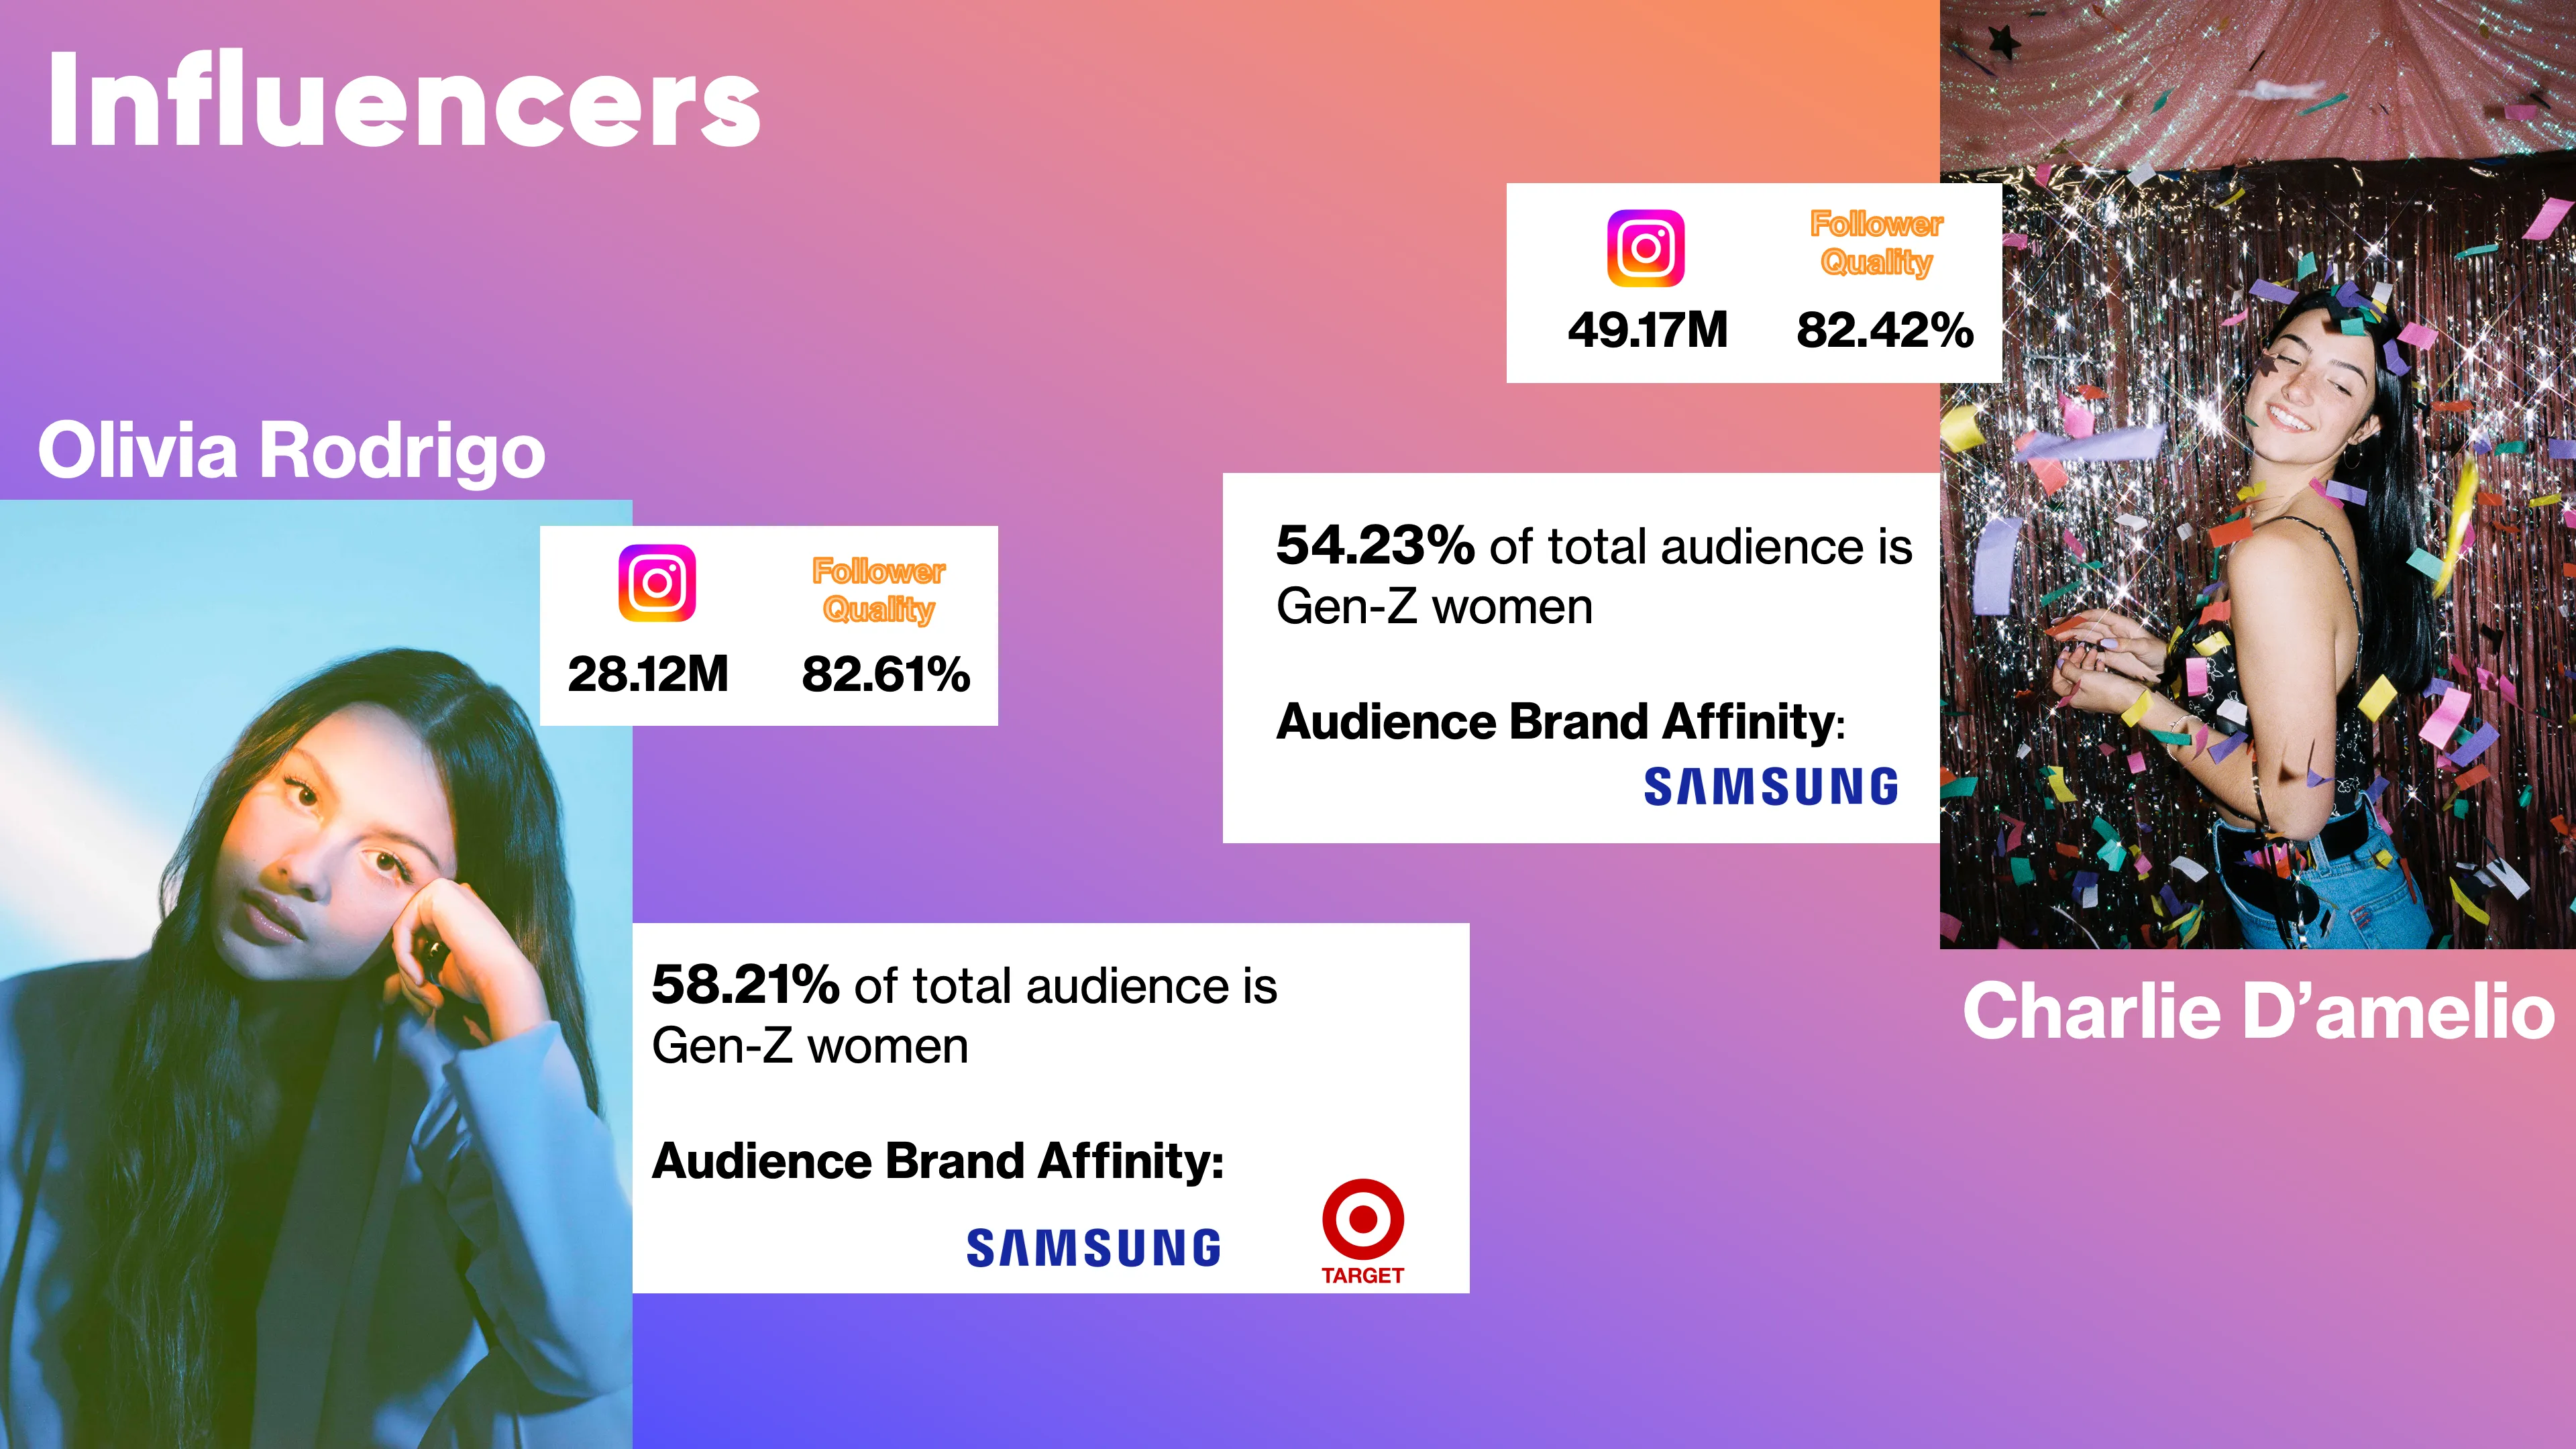 Slide 19, giving an overview of how Samsung could build its influencer portfolio.